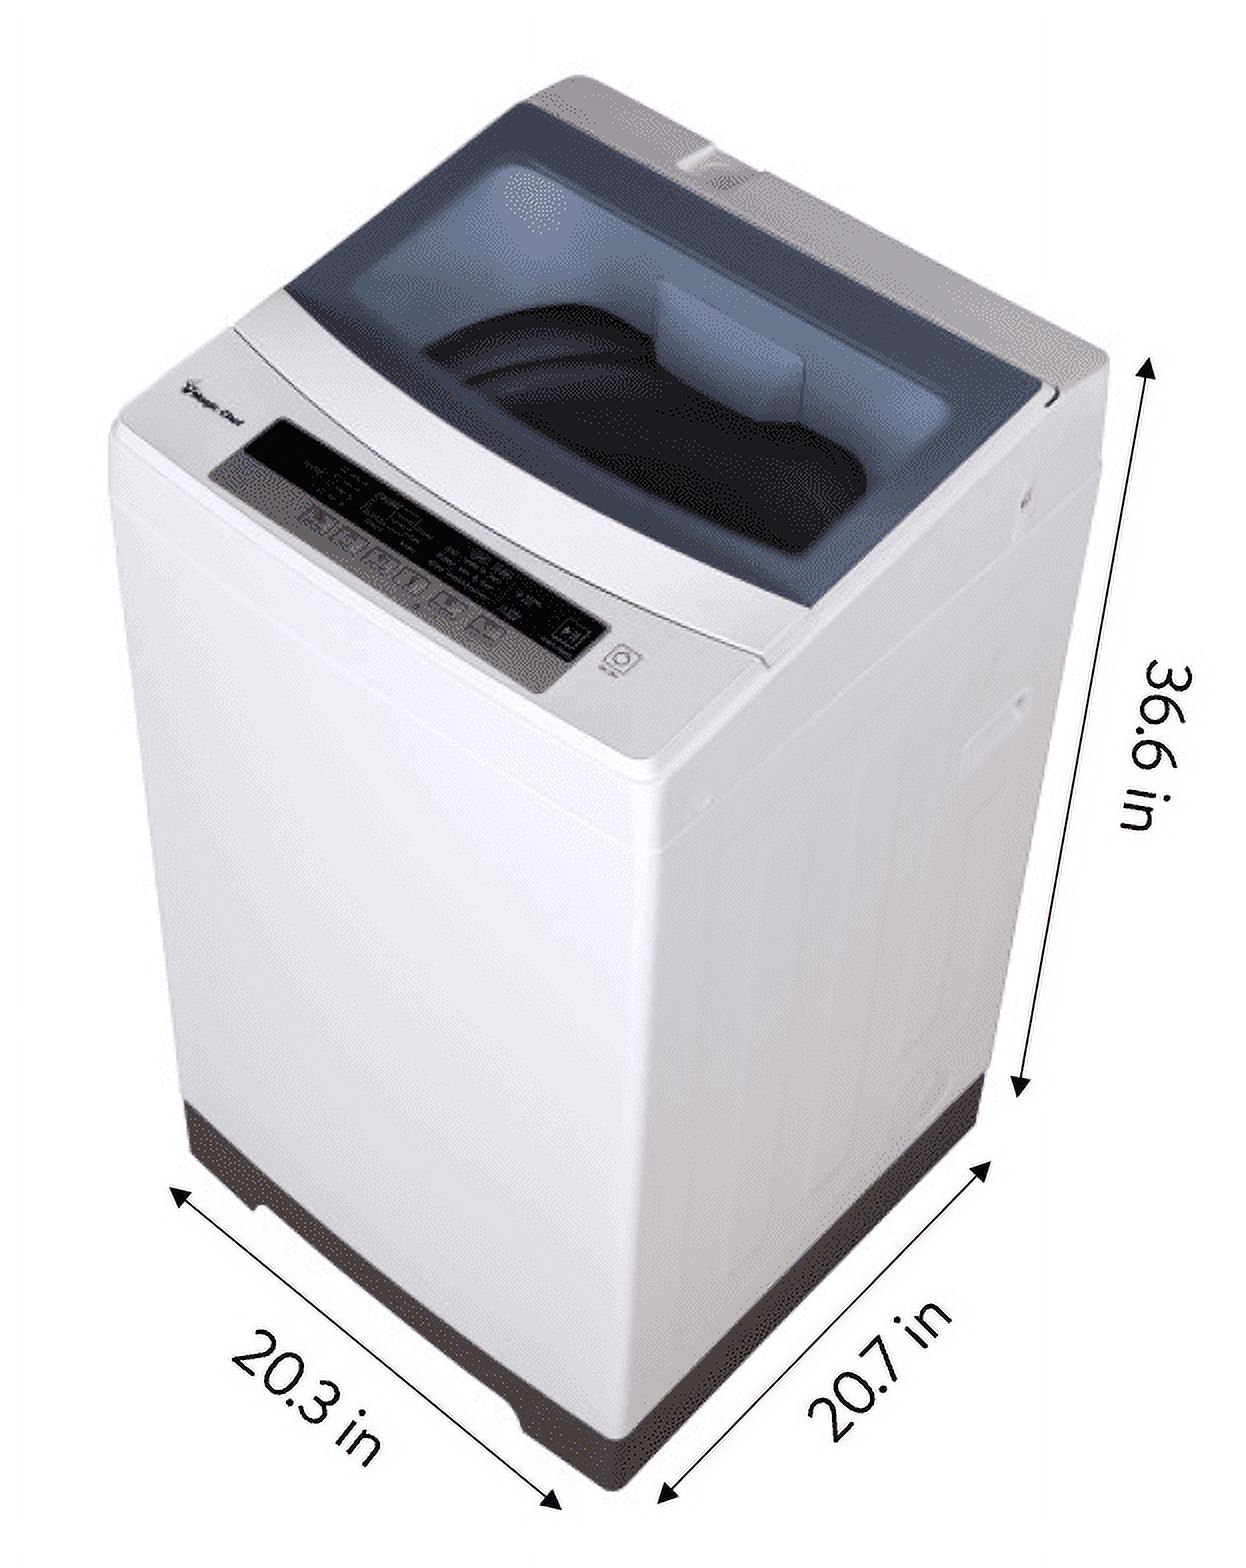 Magic Chef 1.6 cu. ft. Compact Portable Top-Load Washer, White - image 4 of 8